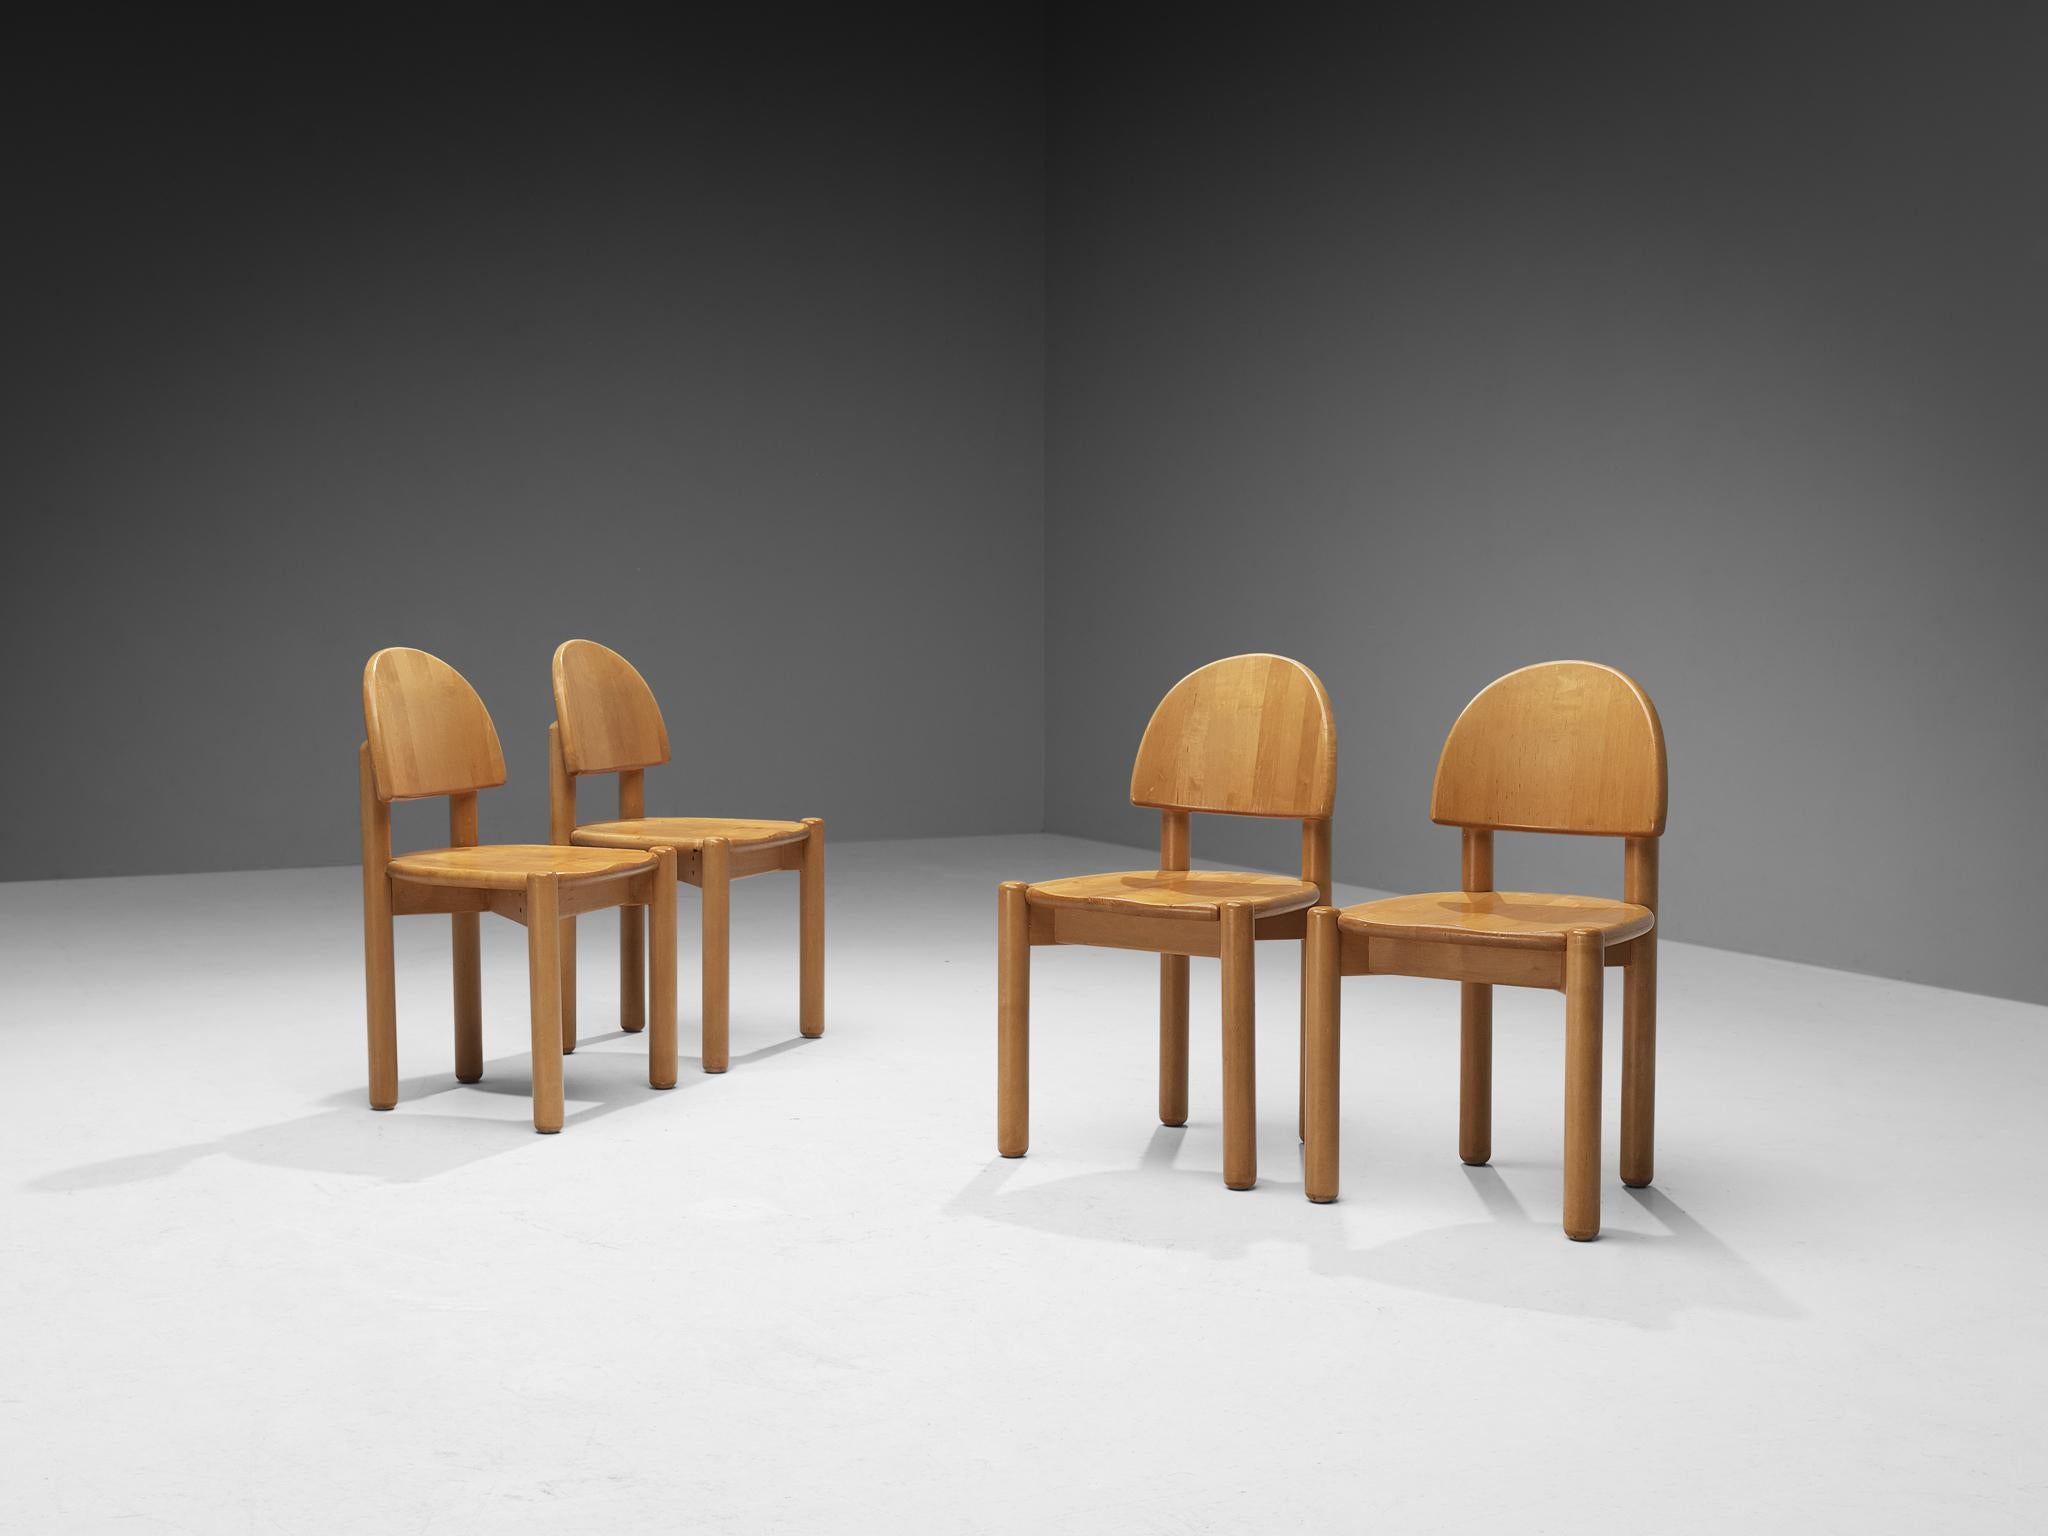 Rainer Daumiller for Hirtshals Sawmill, set of four dining chairs, pine, Denmark, 1970s

Beautiful, organic and natural dining chairs in solid pine designed by Rainer Daumiller. A simplistic design with a round seating and attention for the